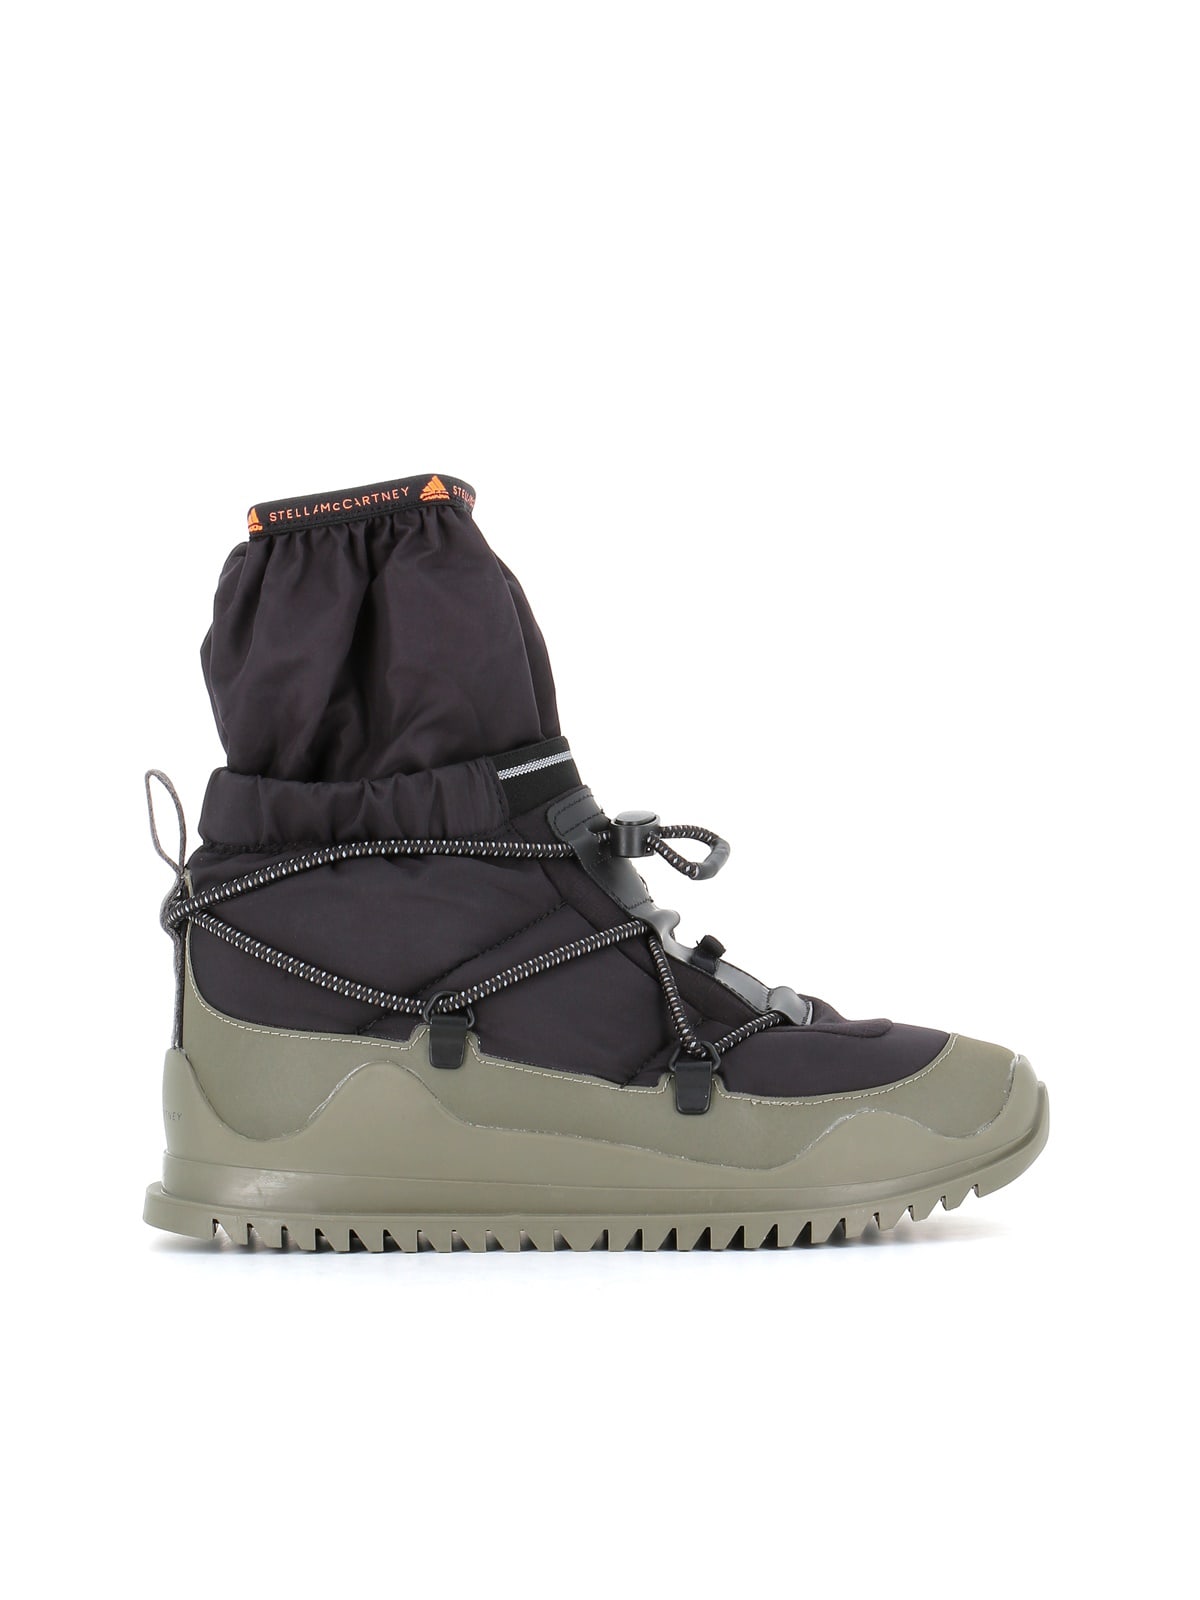 Adidas by Stella McCartney Ankle Boot Winter Cold. rdy